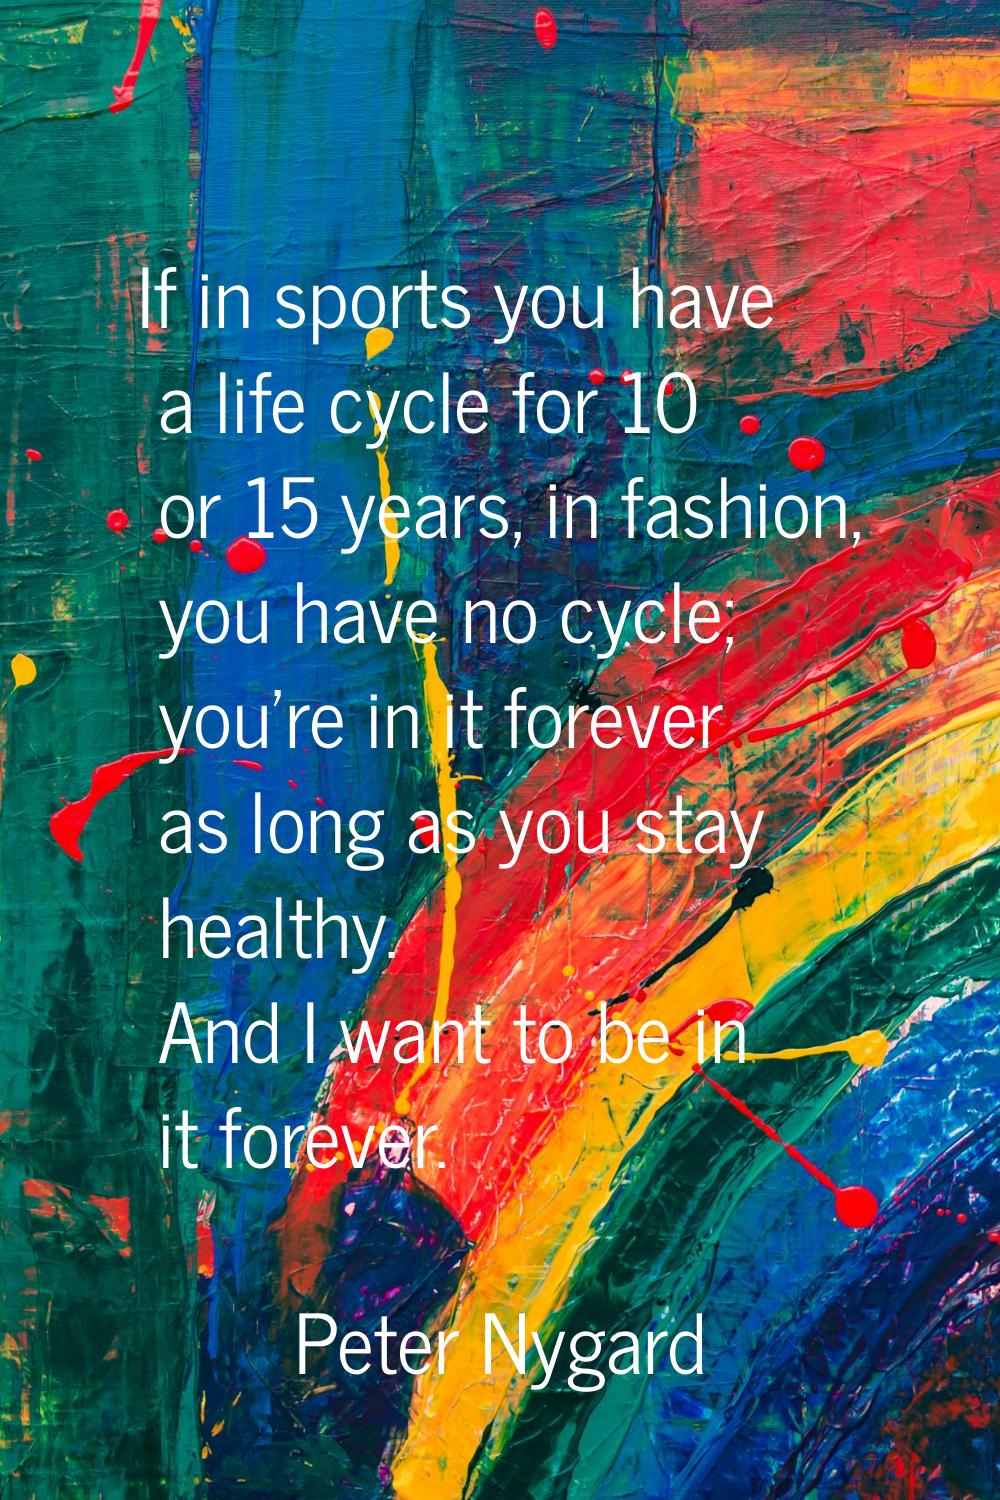 If in sports you have a life cycle for 10 or 15 years, in fashion, you have no cycle; you're in it 